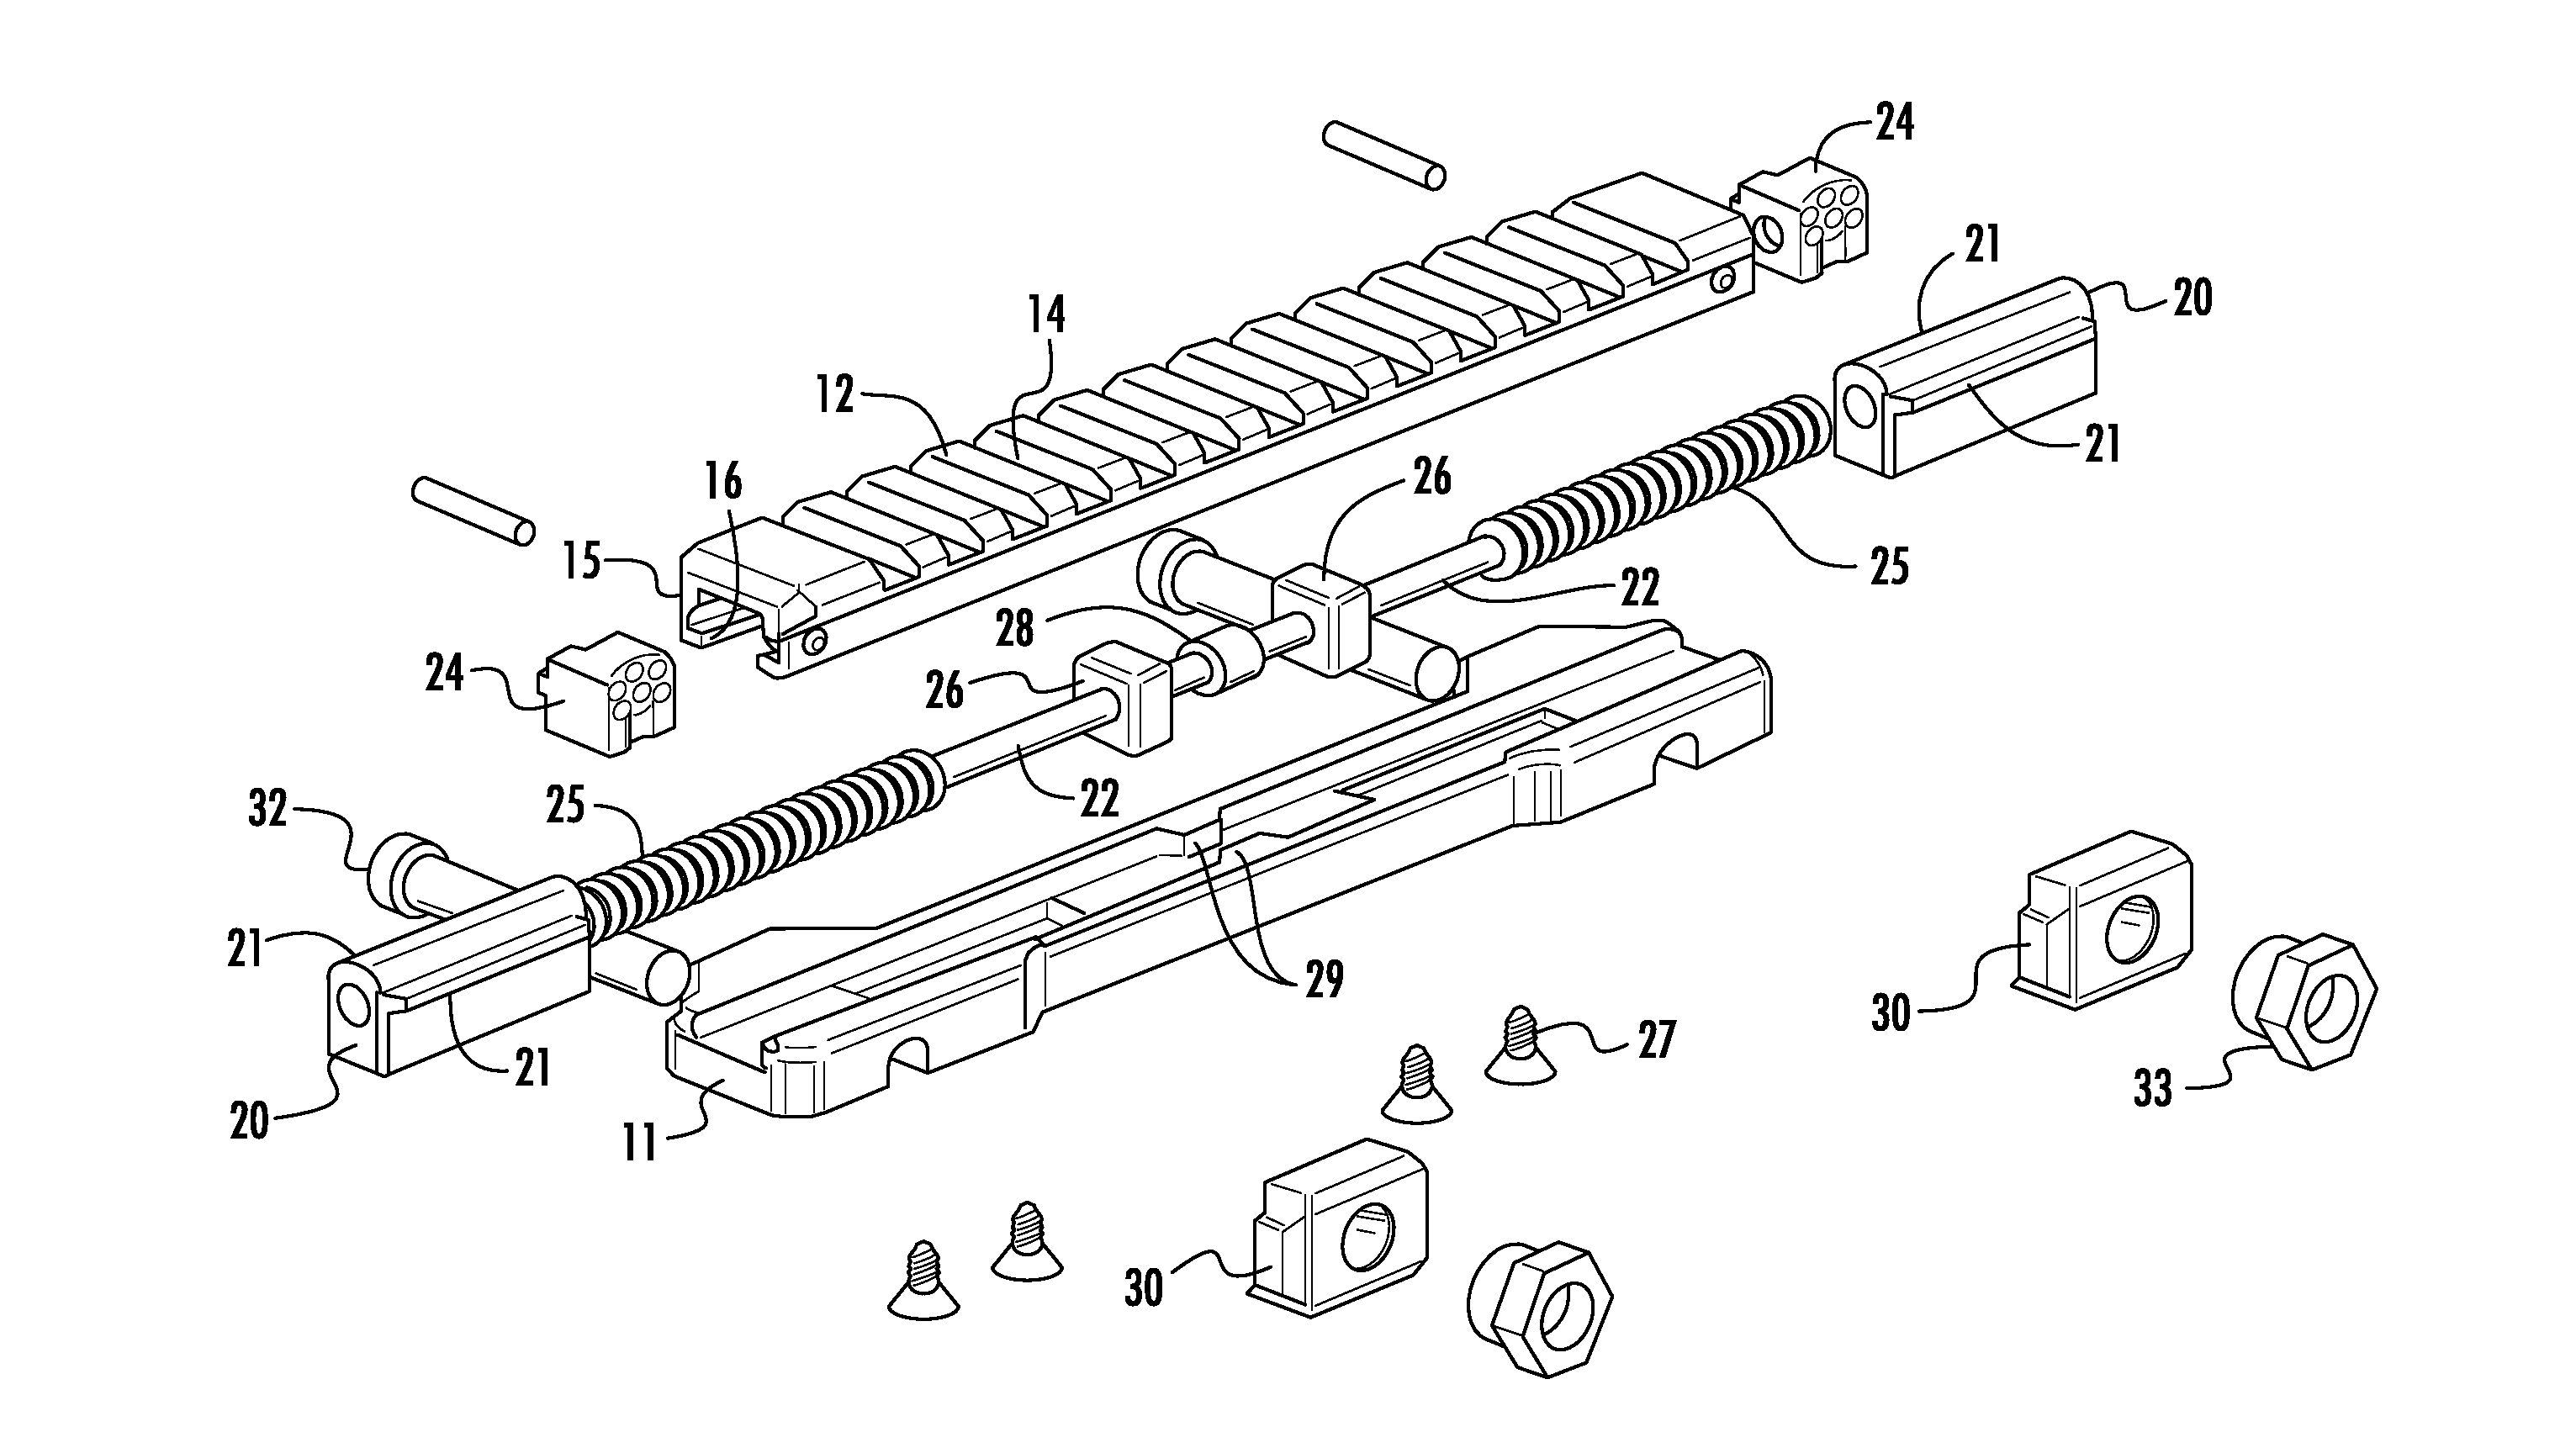 Recoil force mitigating device for firearms